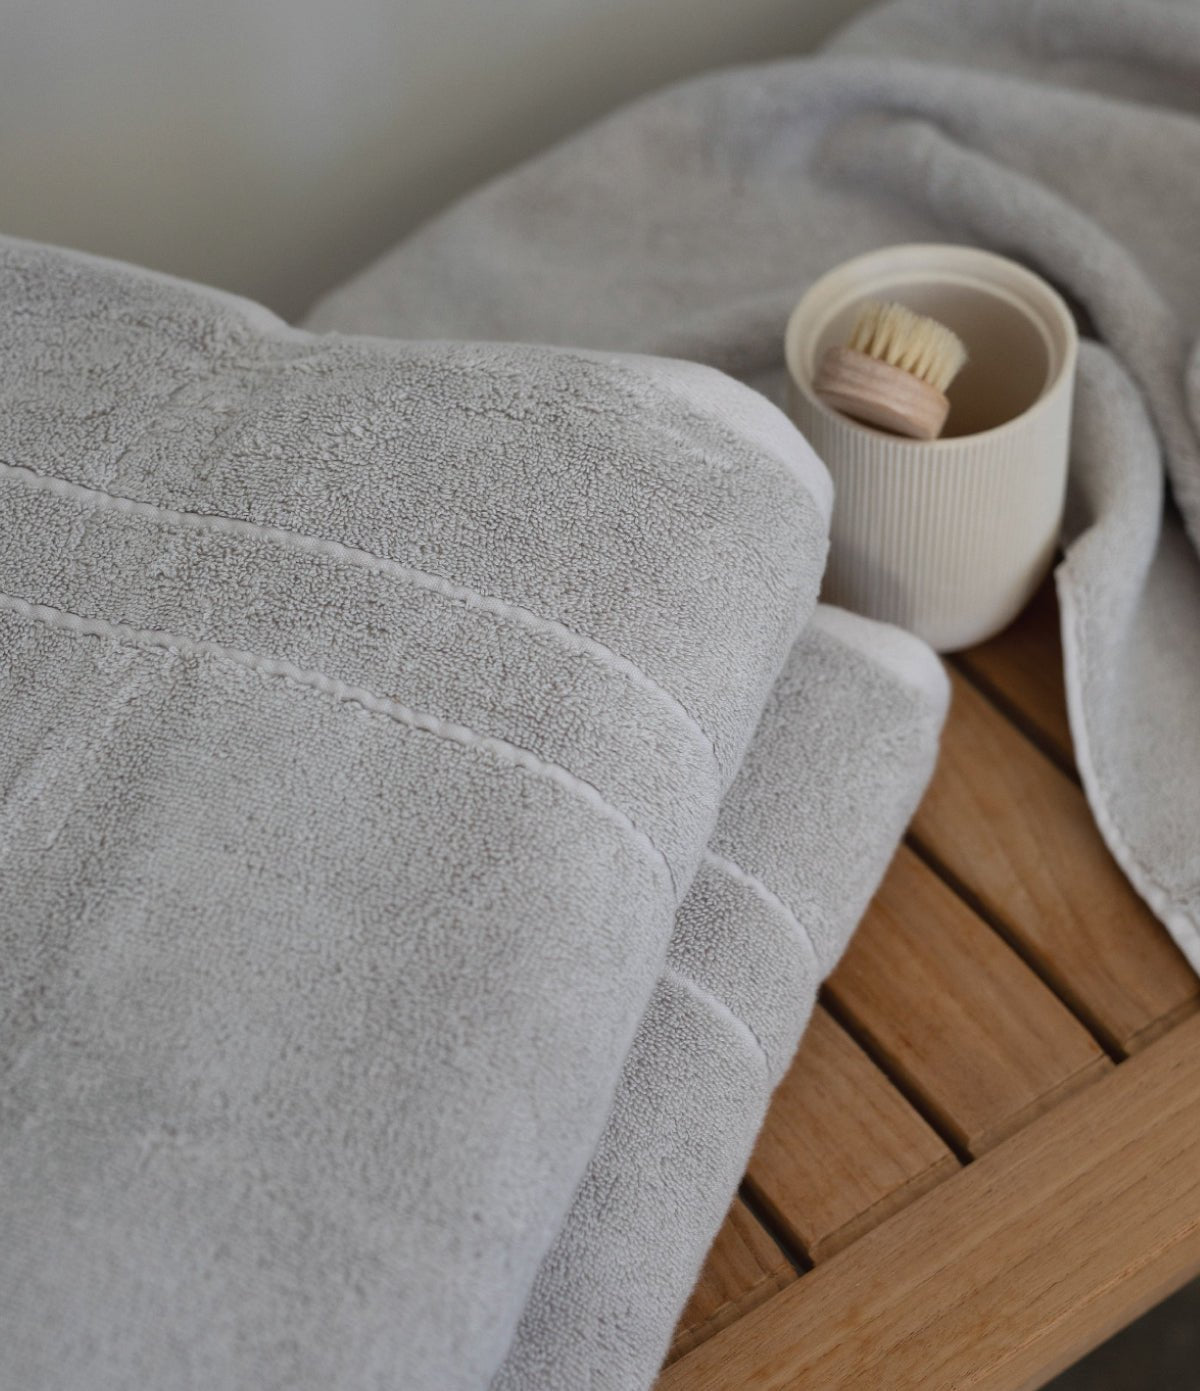 Light Grey The Premium Plush Bath Sheet folded on a wooden bench. Bath products are resting on the bench as well. 